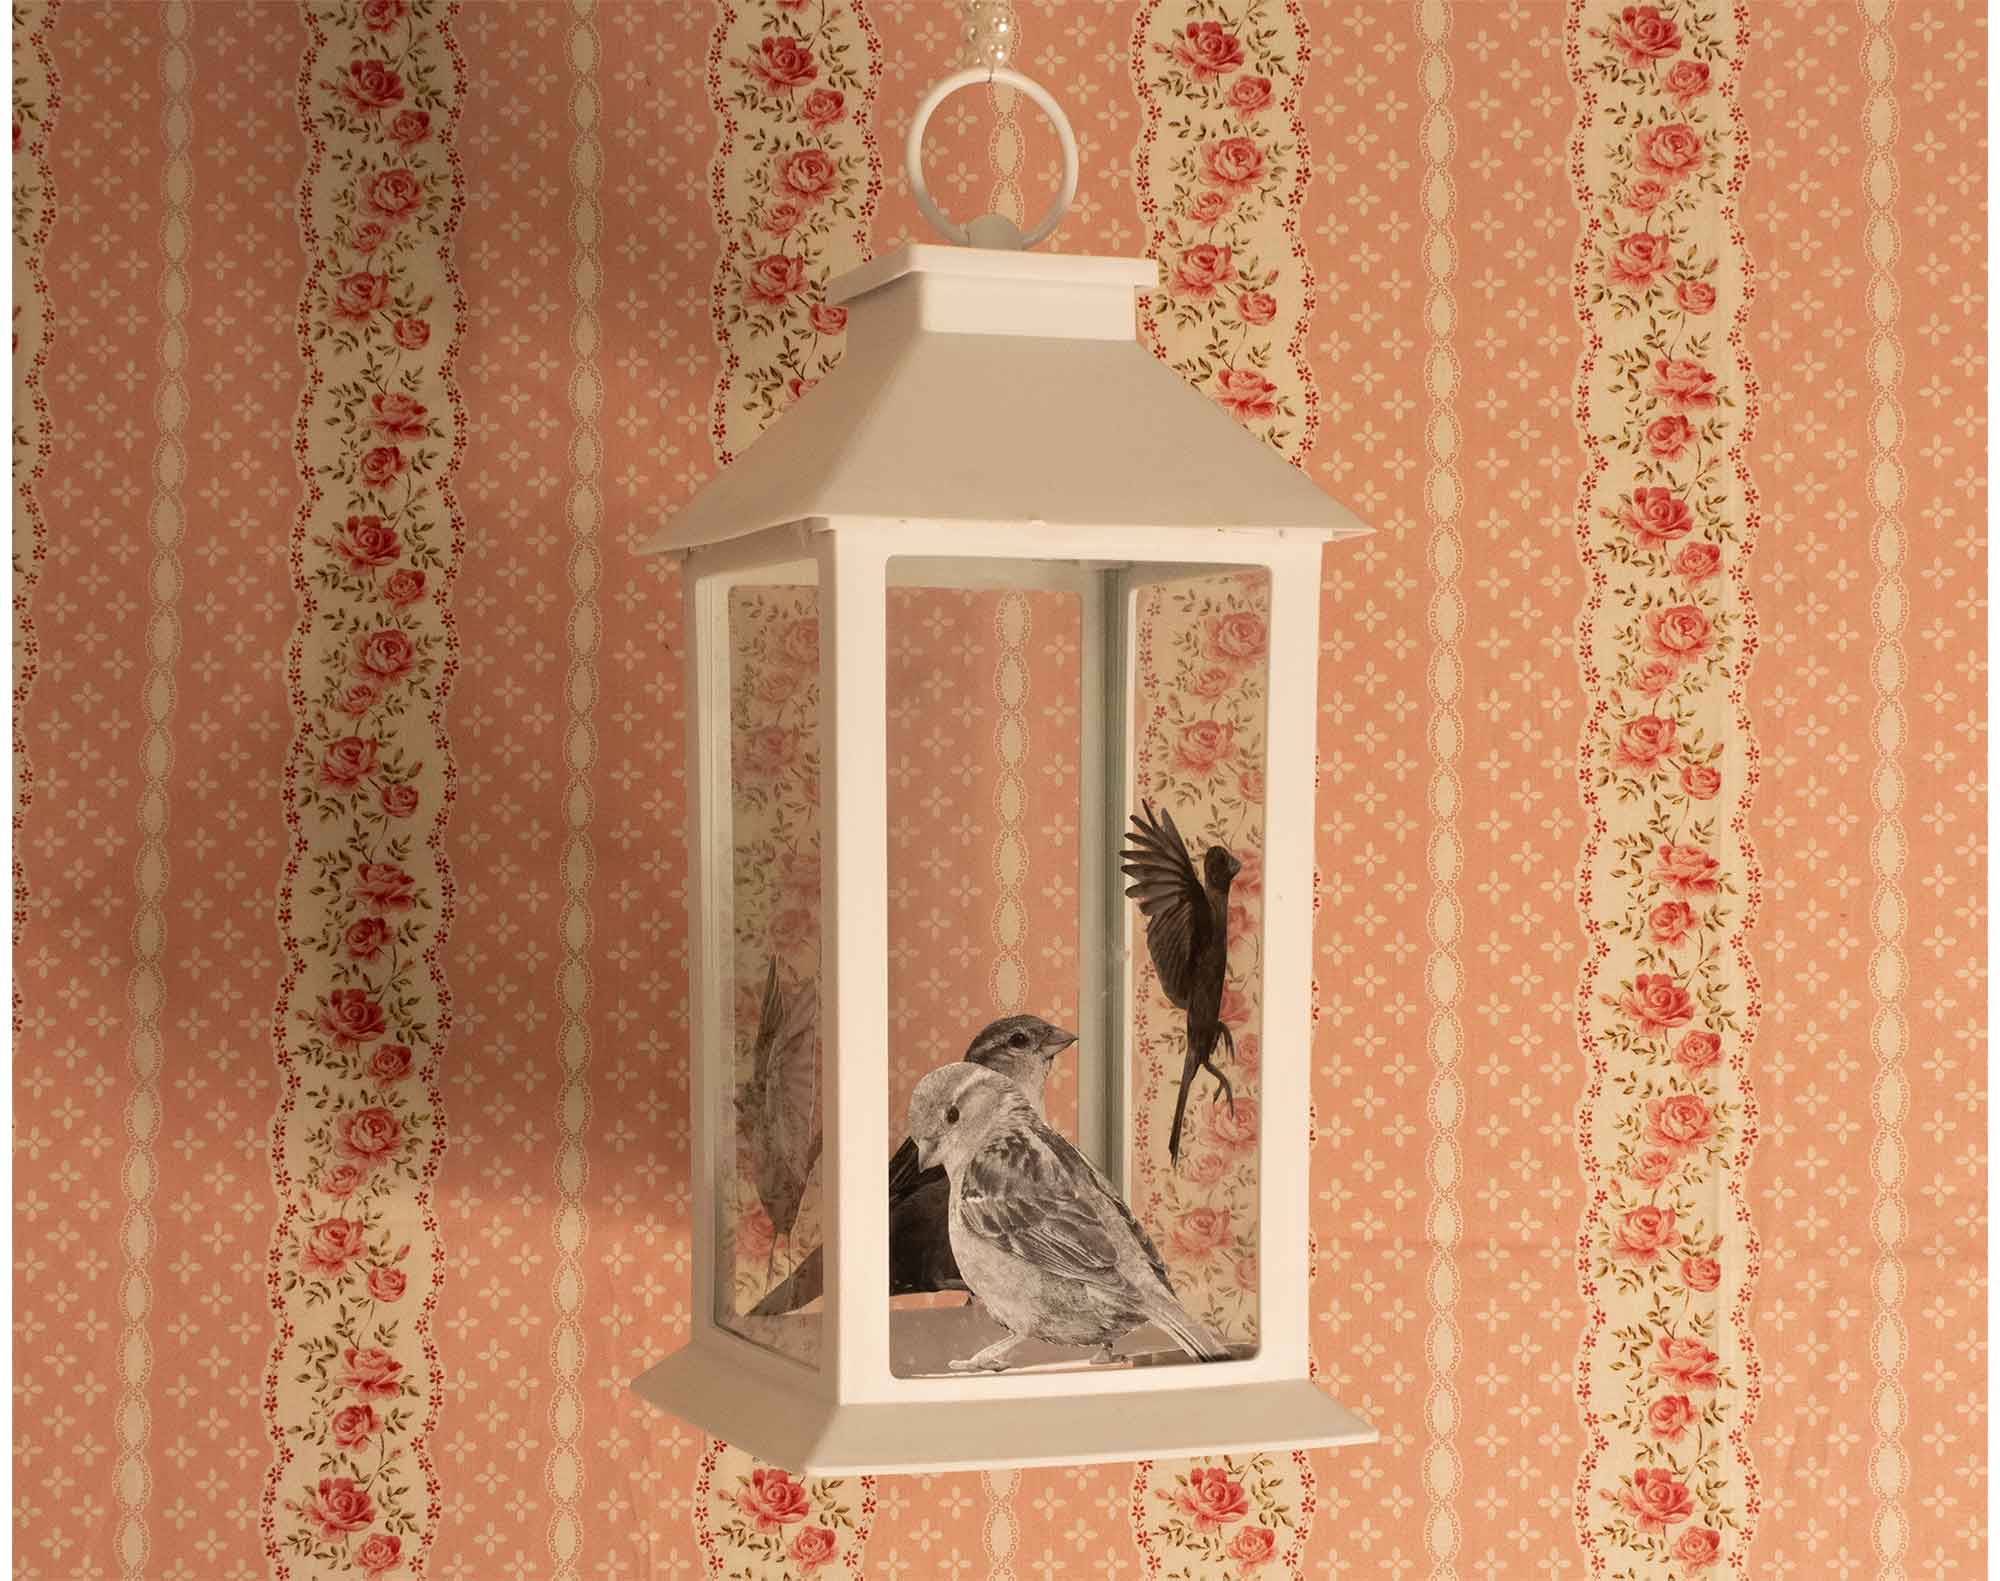 Black and white paper birds pasted inside each panel of a white plastic lantern hanging in front of a pink striped flower pattern